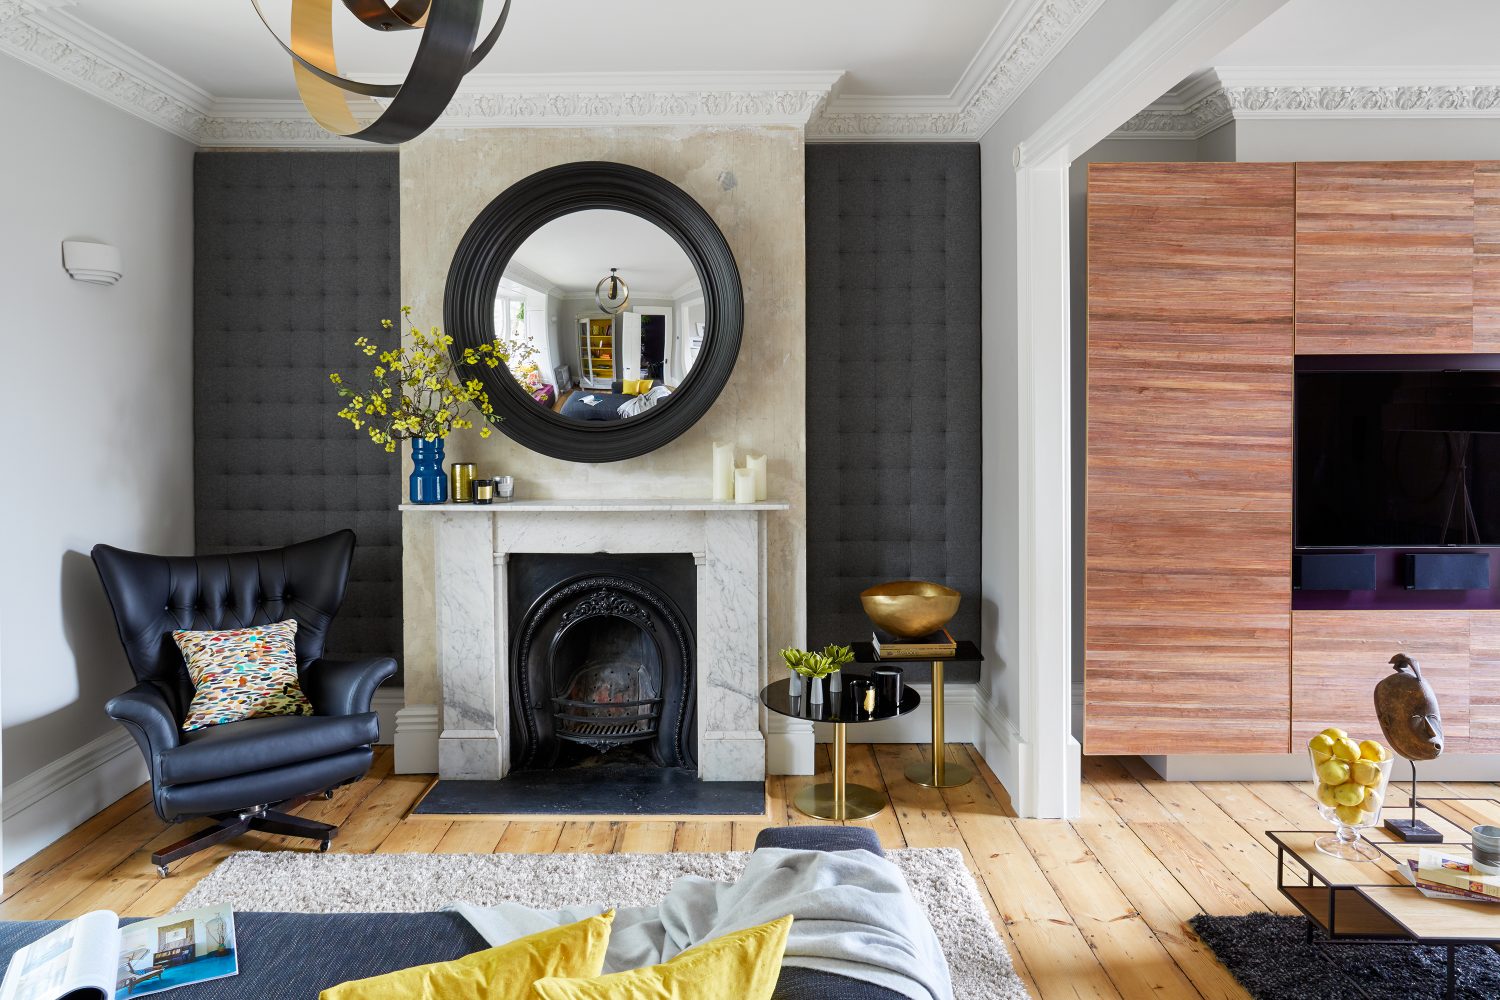 Happy House by Daniel Hopwood – padded alcoves to suppress sound. Eclectic design